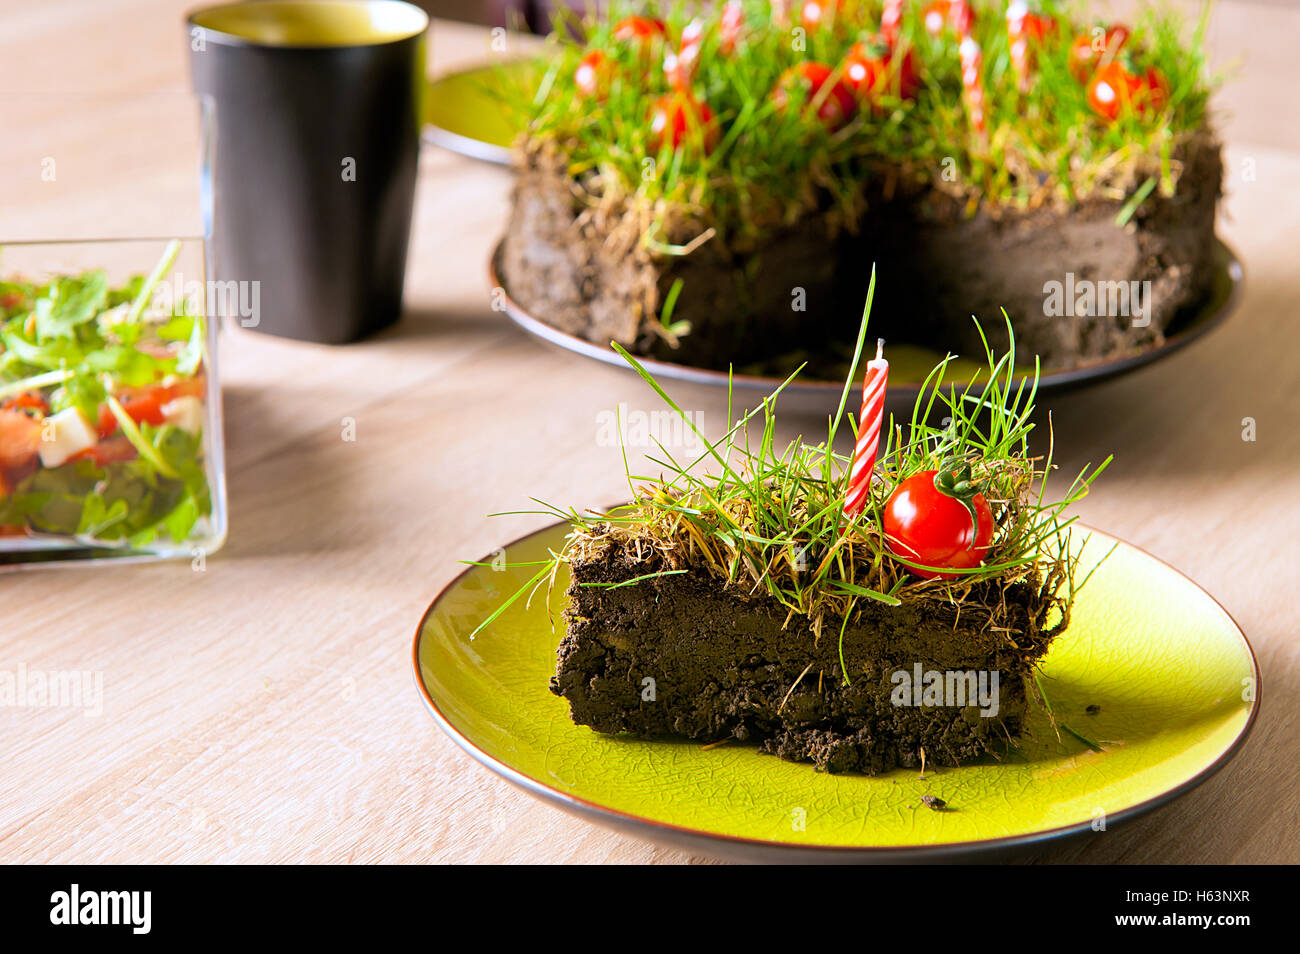 An improvised garden cake made from ground, grass, candles and cherry tomatoes. Stock Photo